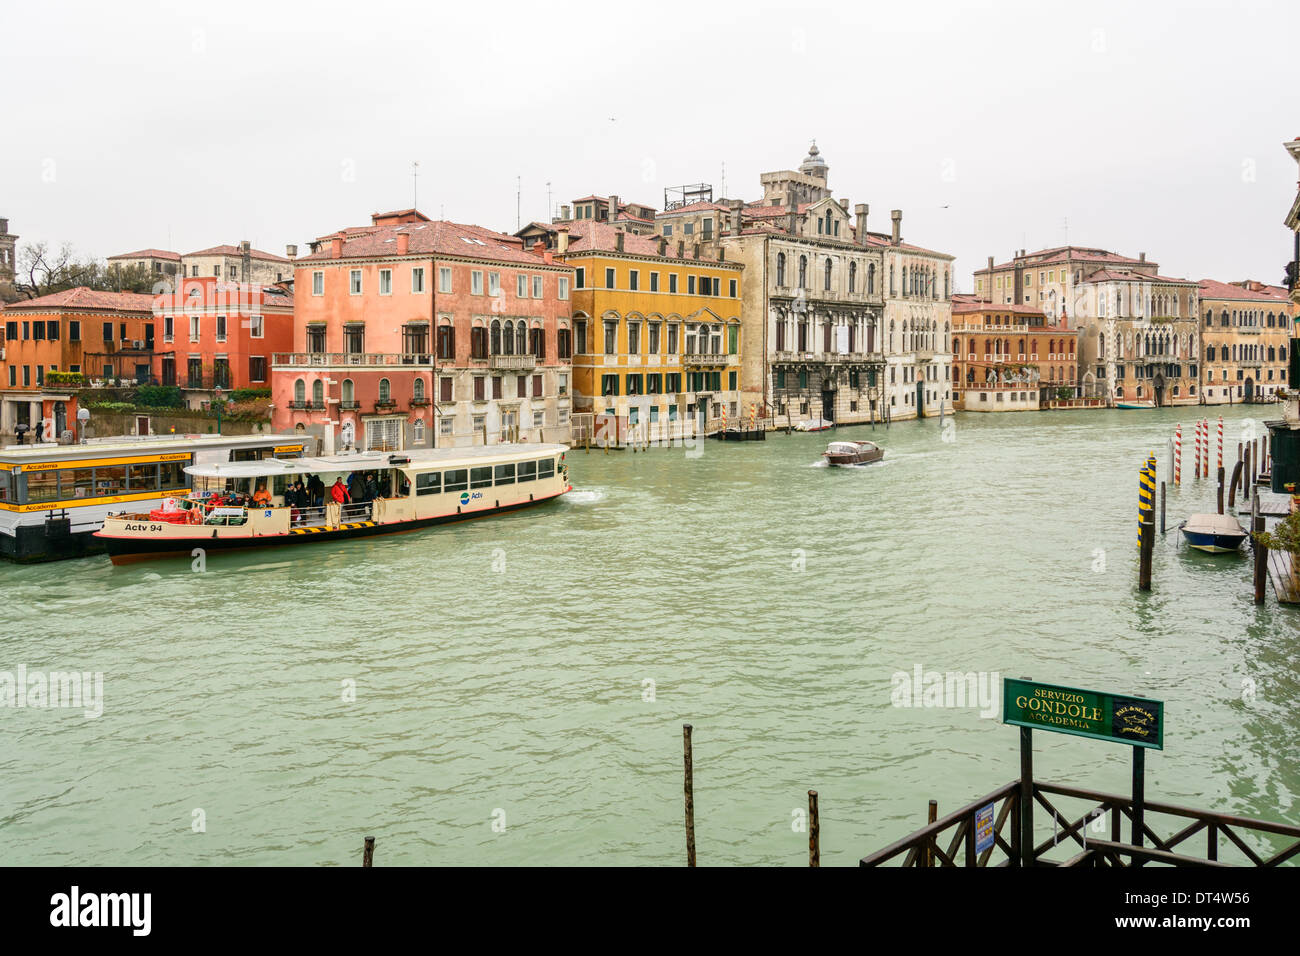 Venice, Italy. View over the Grand Canal at an overcast rainy day. Stock Photo